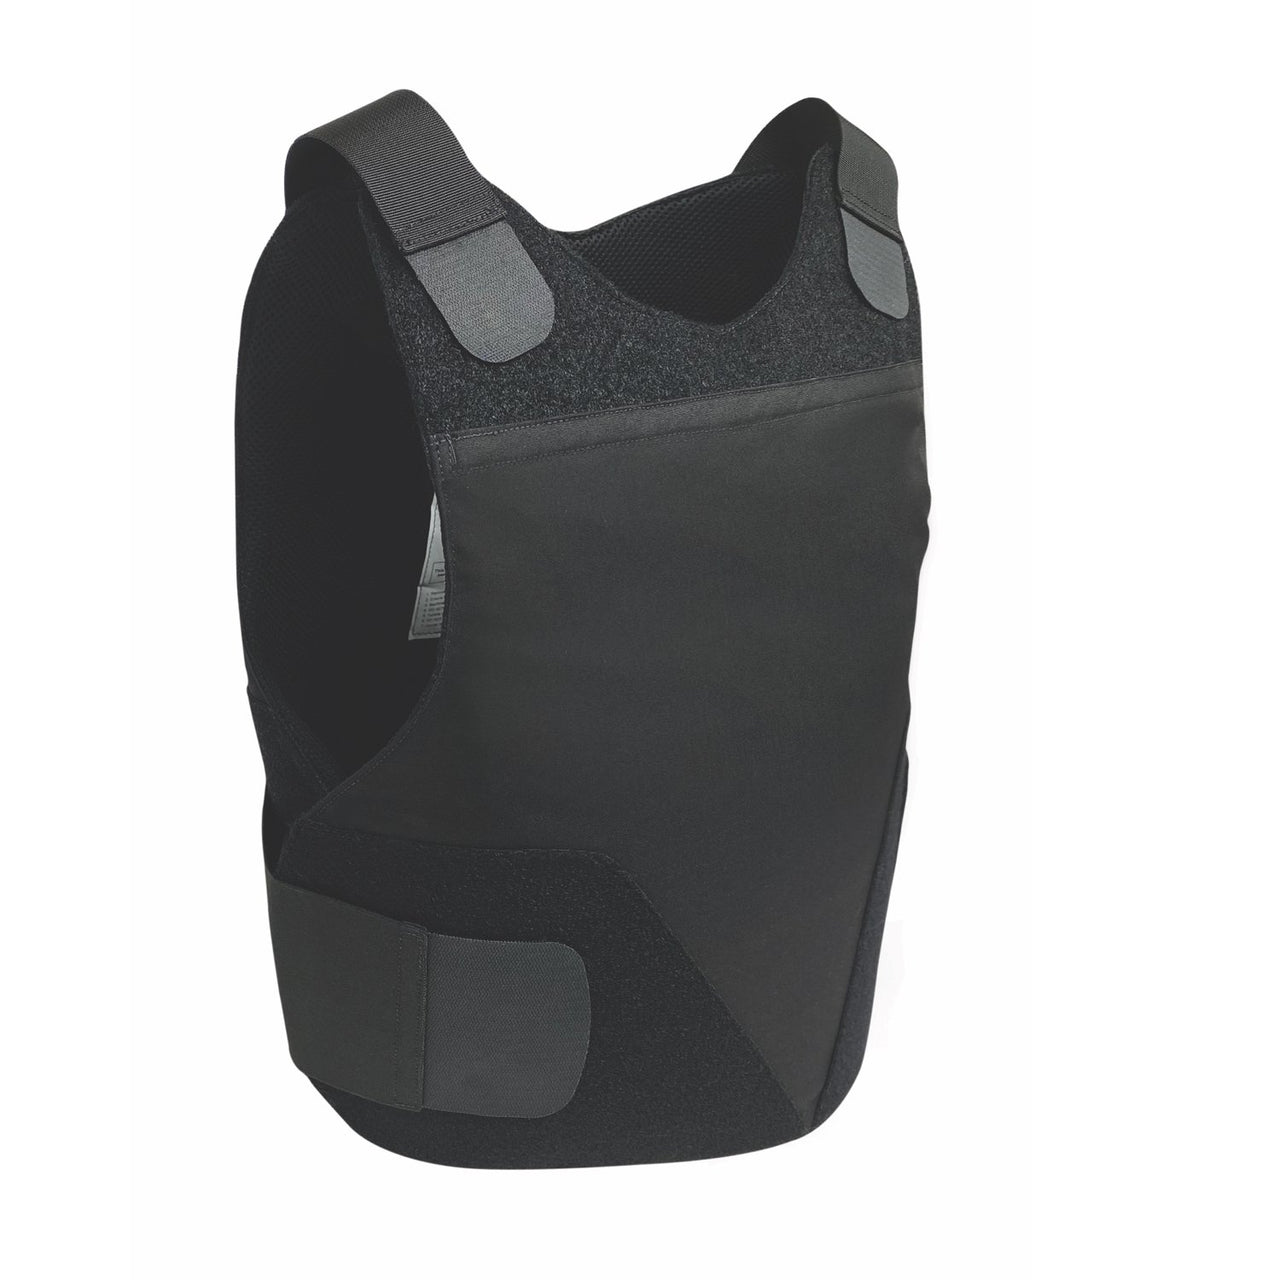 A Body Armor Direct All American Concealable Carrier vest with an adjustable strap.